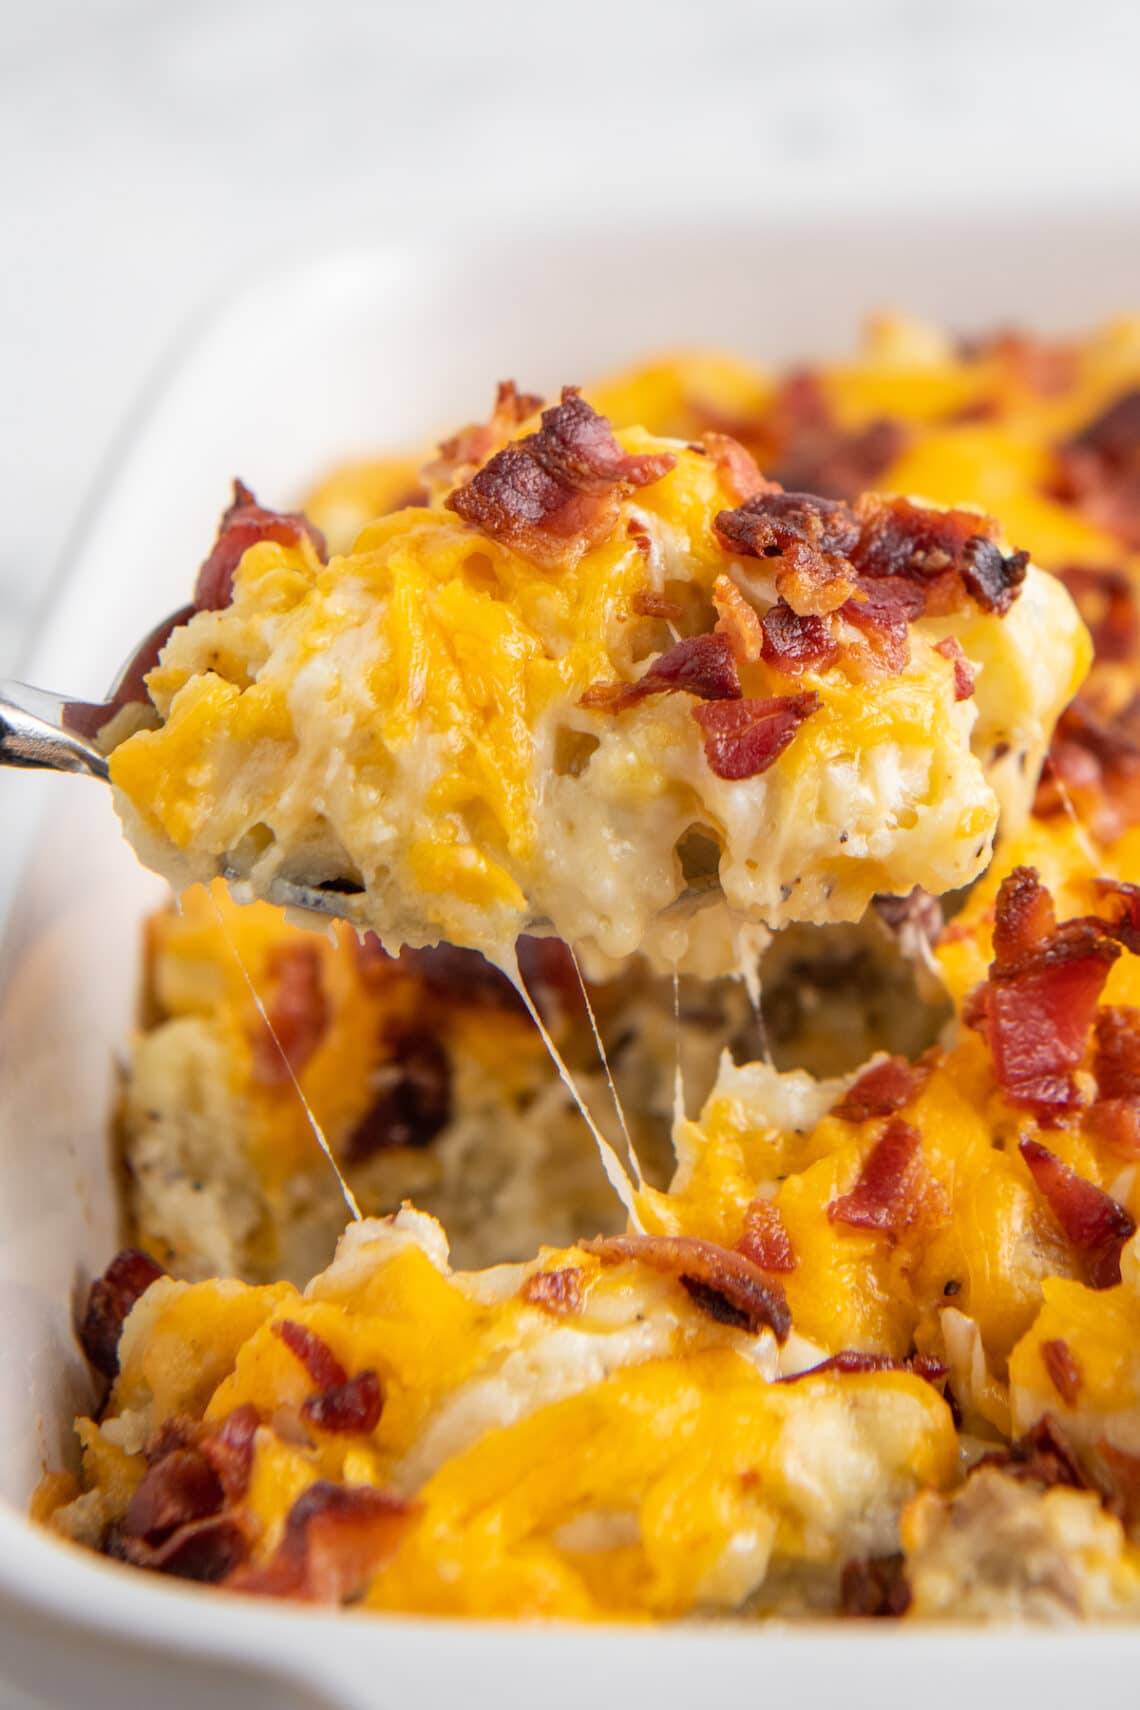 Up close image of twice baked potato casserole being scooped out with a spoon.